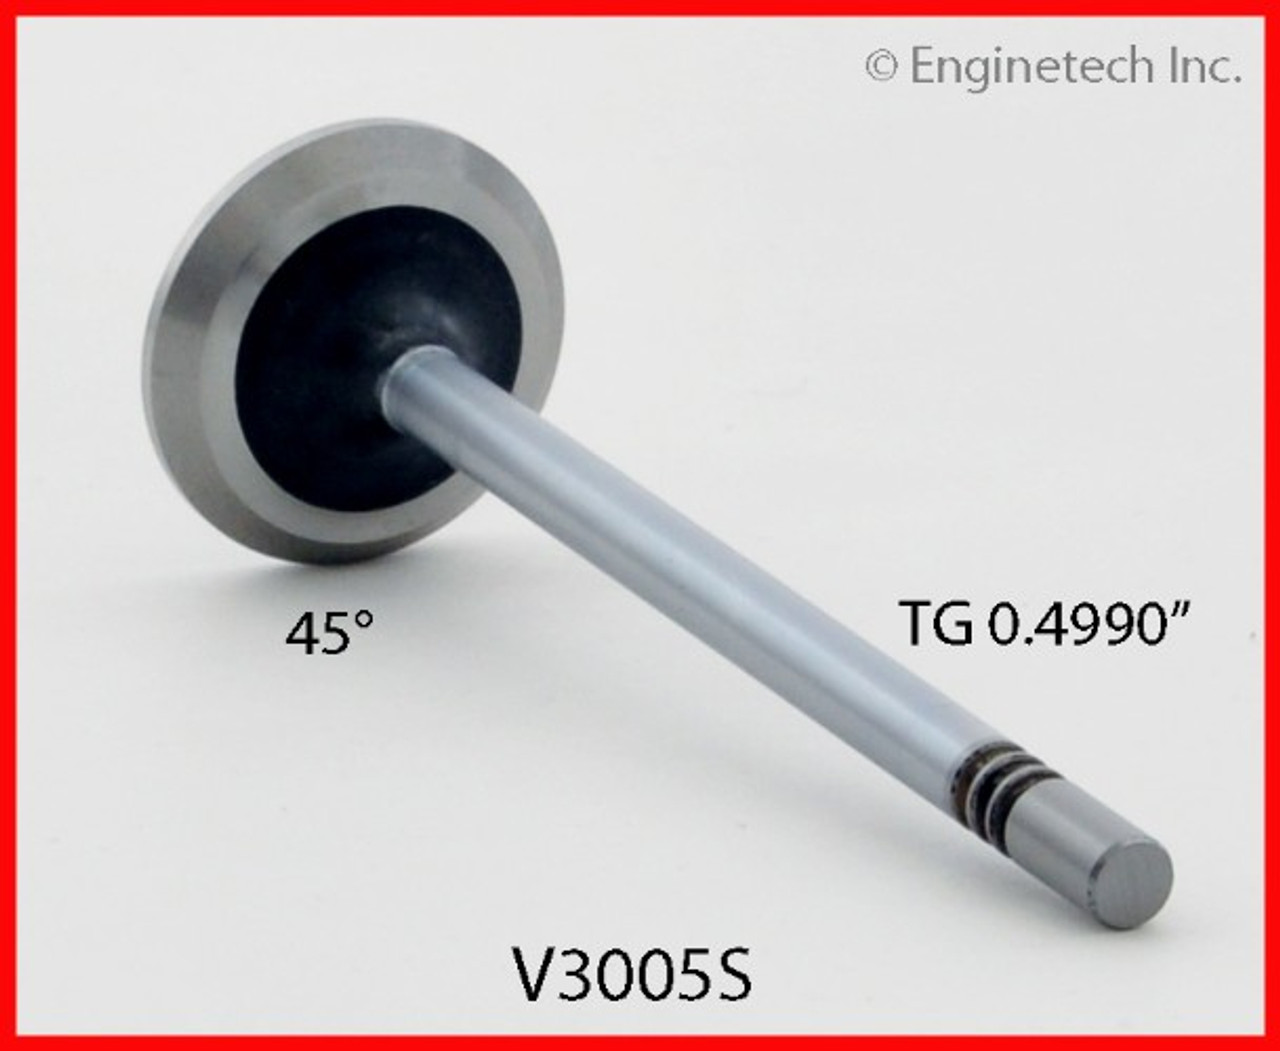 Exhaust Valve - 2000 Ford Expedition 5.4L (V3005S.C24)